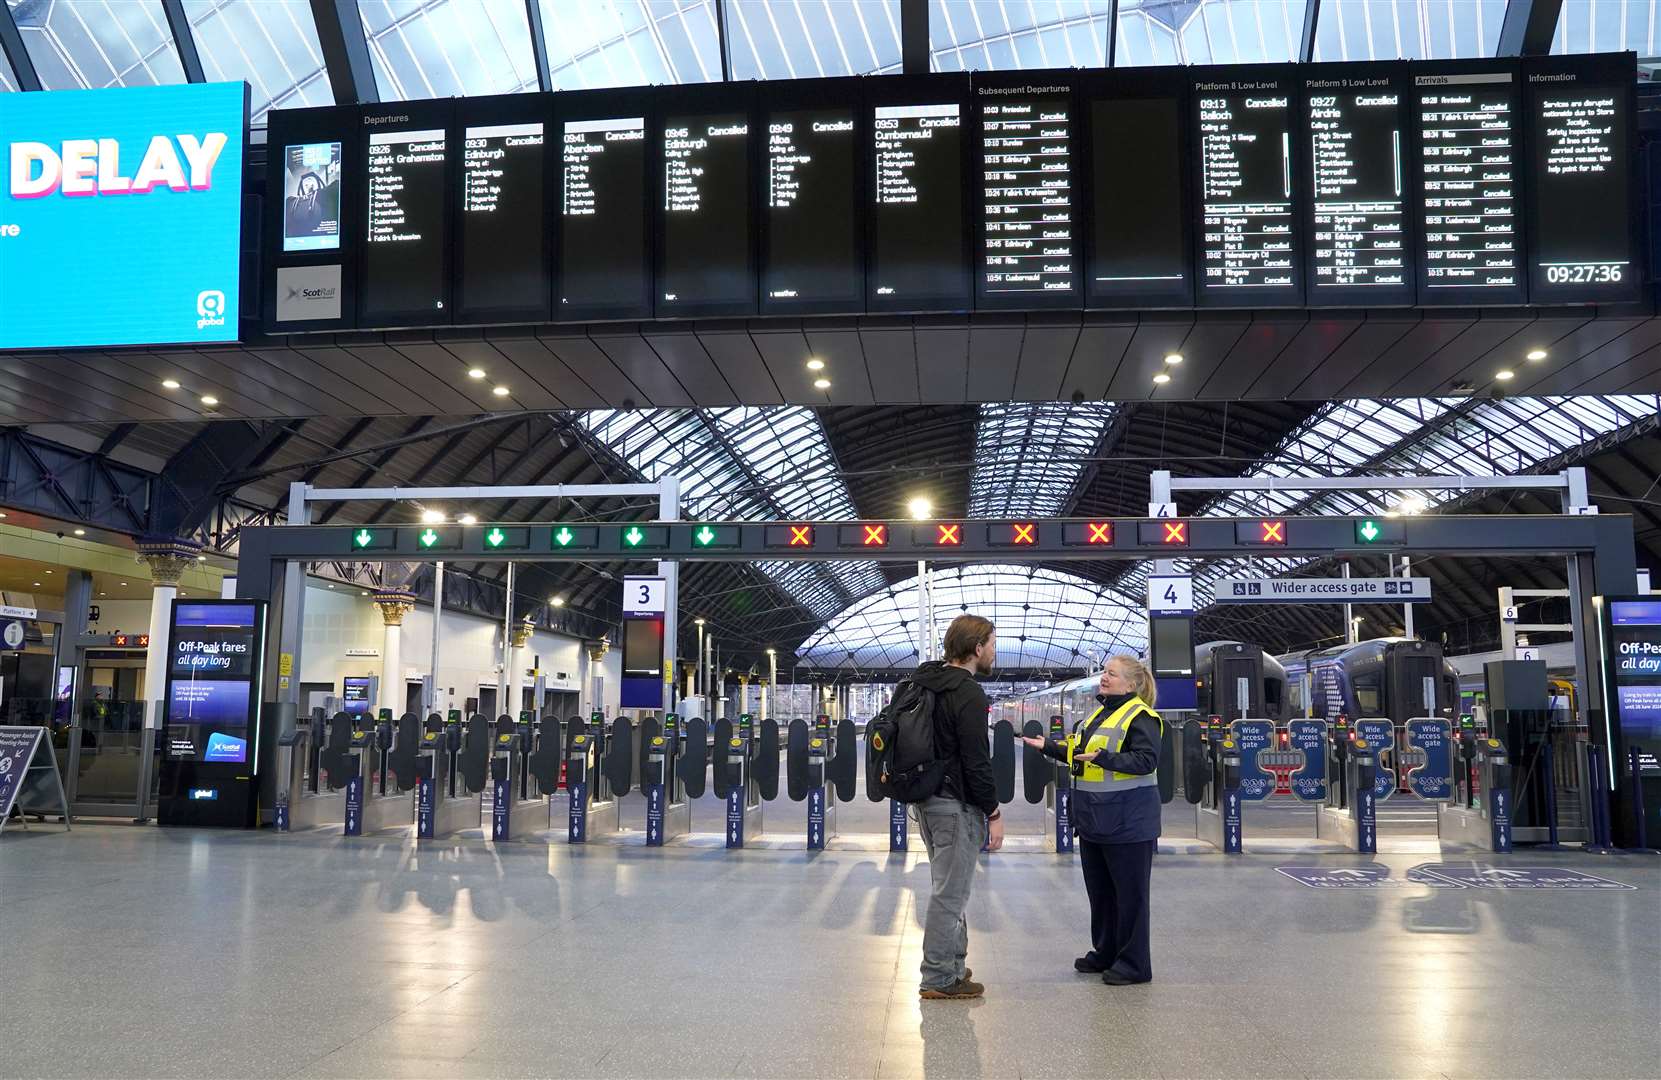 Queen Street station in Glasgow was empty as all trains were cancelled in Scotland due to Storm Jocelyn (Andrew Milligan/PA)